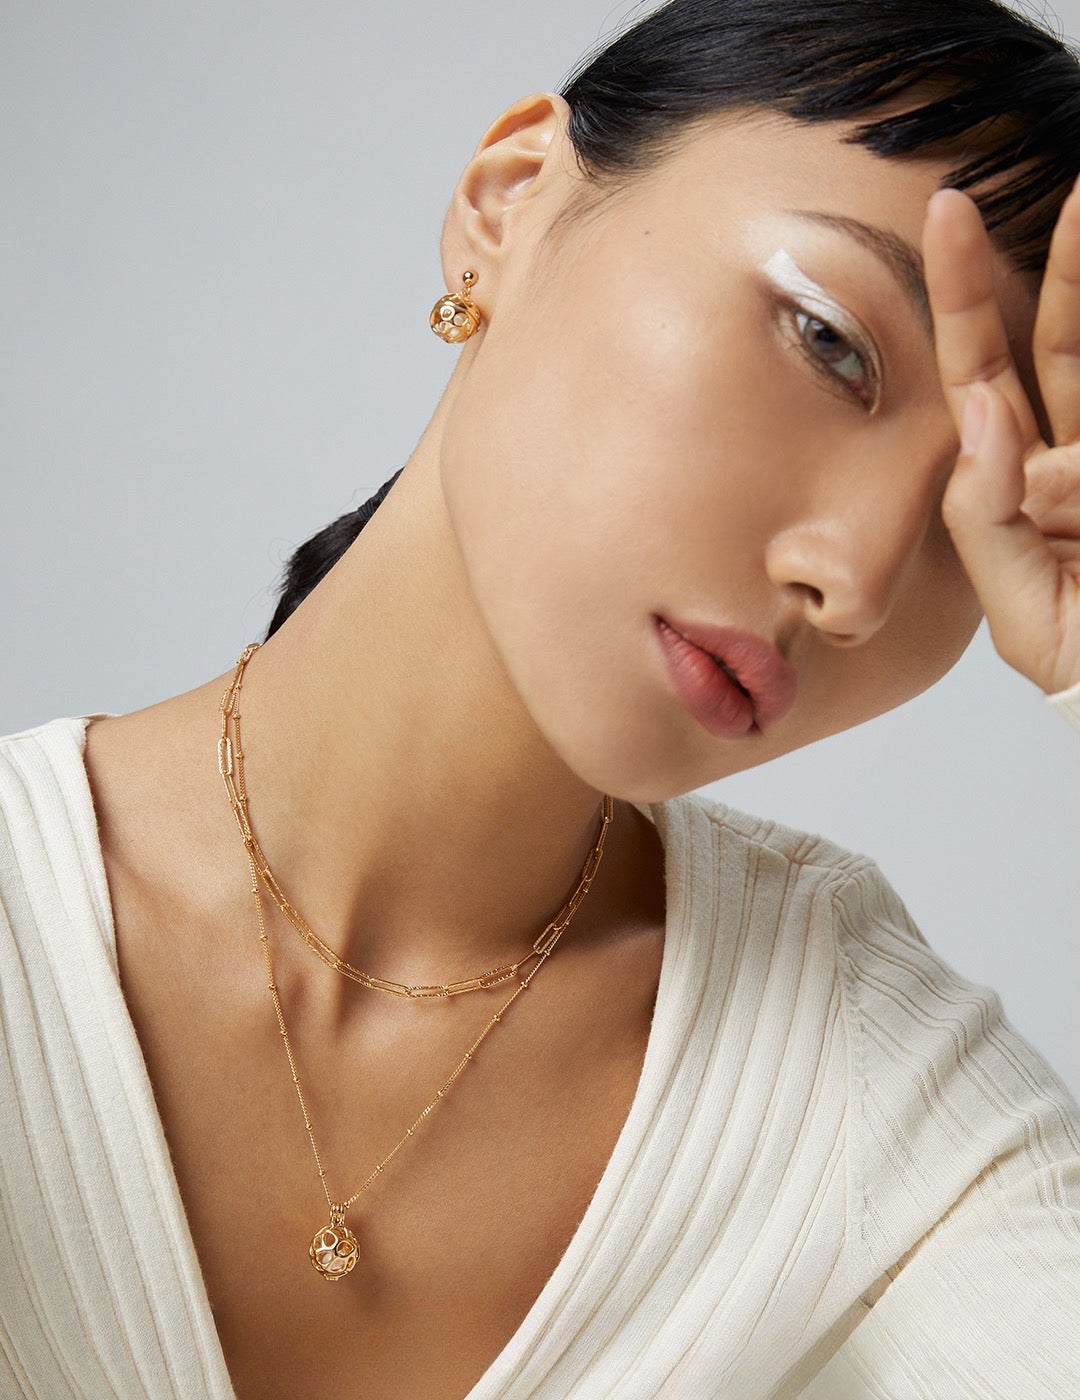 Earrings Embracing the Beauty of Simplicity - S925 Sterling Silver with 18K Gold Vermeil - Elevate your style with these stunning pieces that capture the essence of beauty. Designed to make you shine, these Earrings are a must-have for any occasion